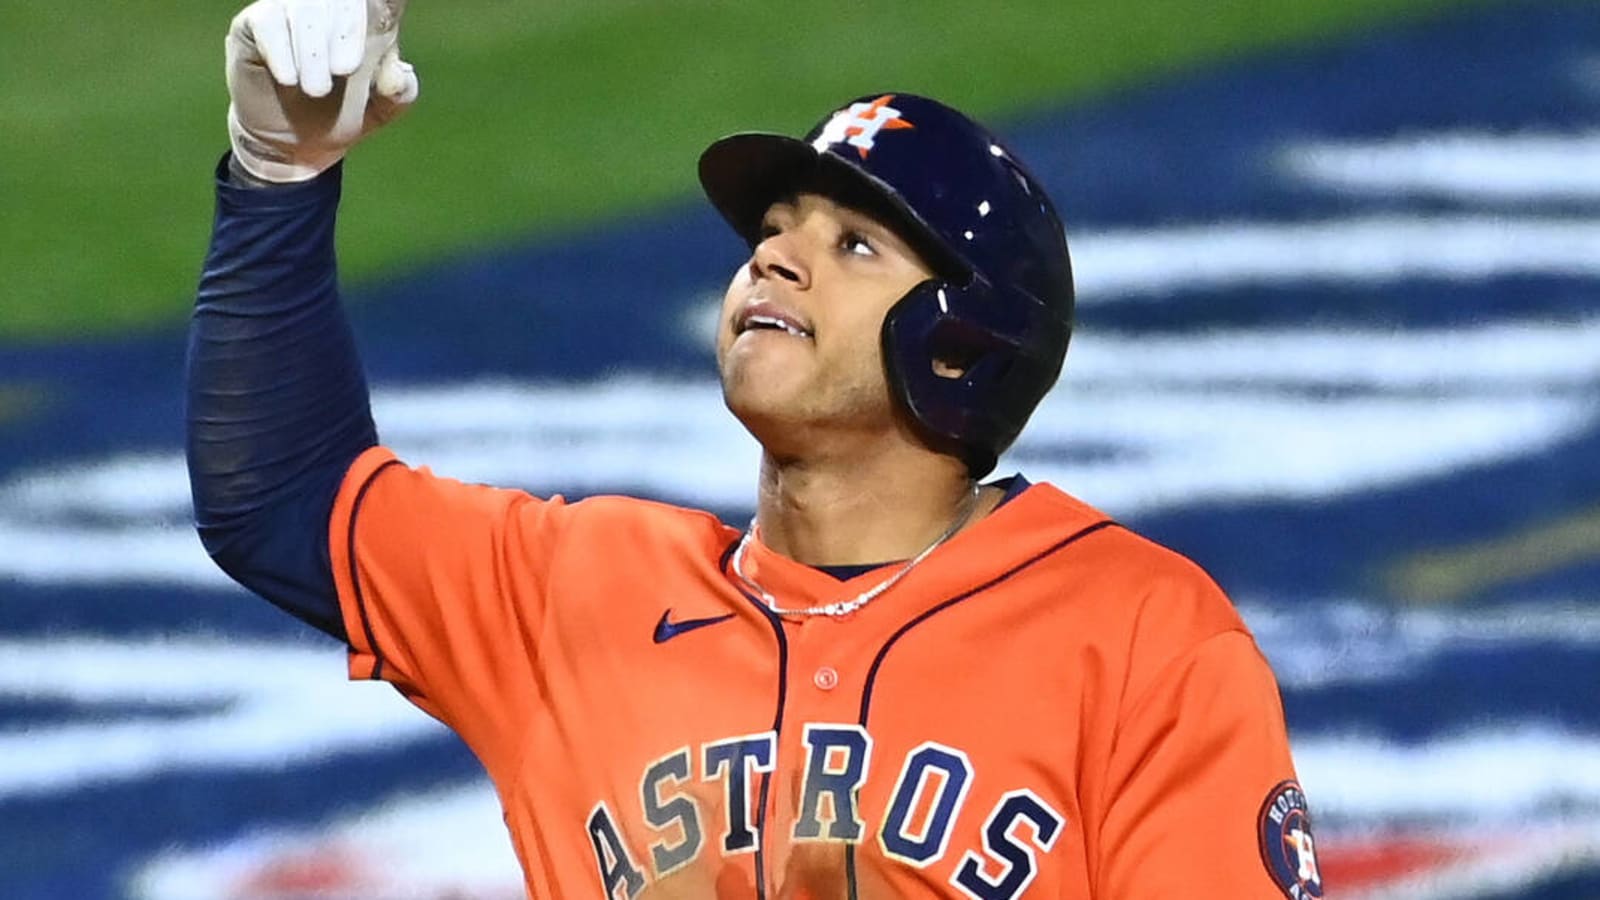 Jeremy Pena is first rookie SS to hit World Series home run